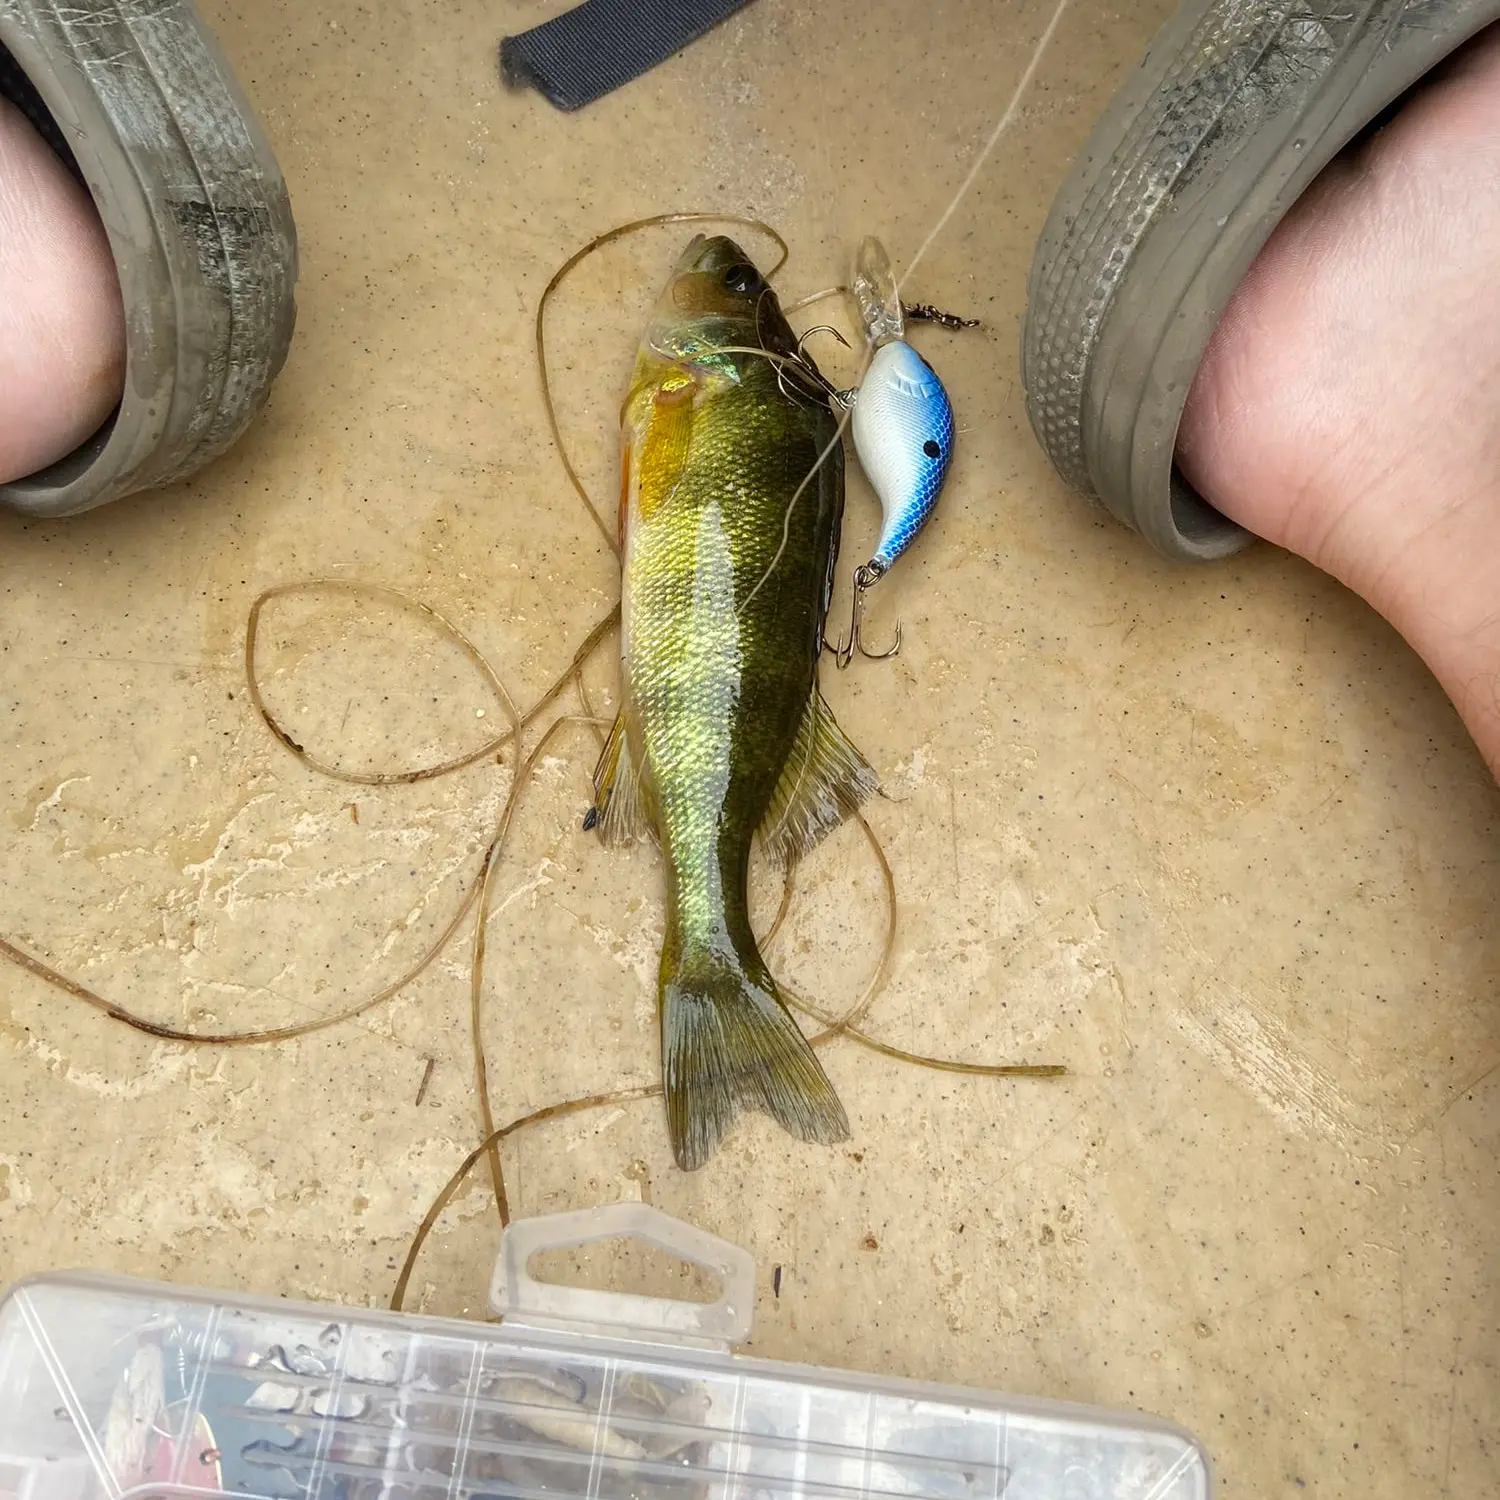 Can any of you provide any info on this hardbait I found in the pond I was  fishing today? Best way to clean it? I plan on replacing hooks. :  r/Fishing_Gear